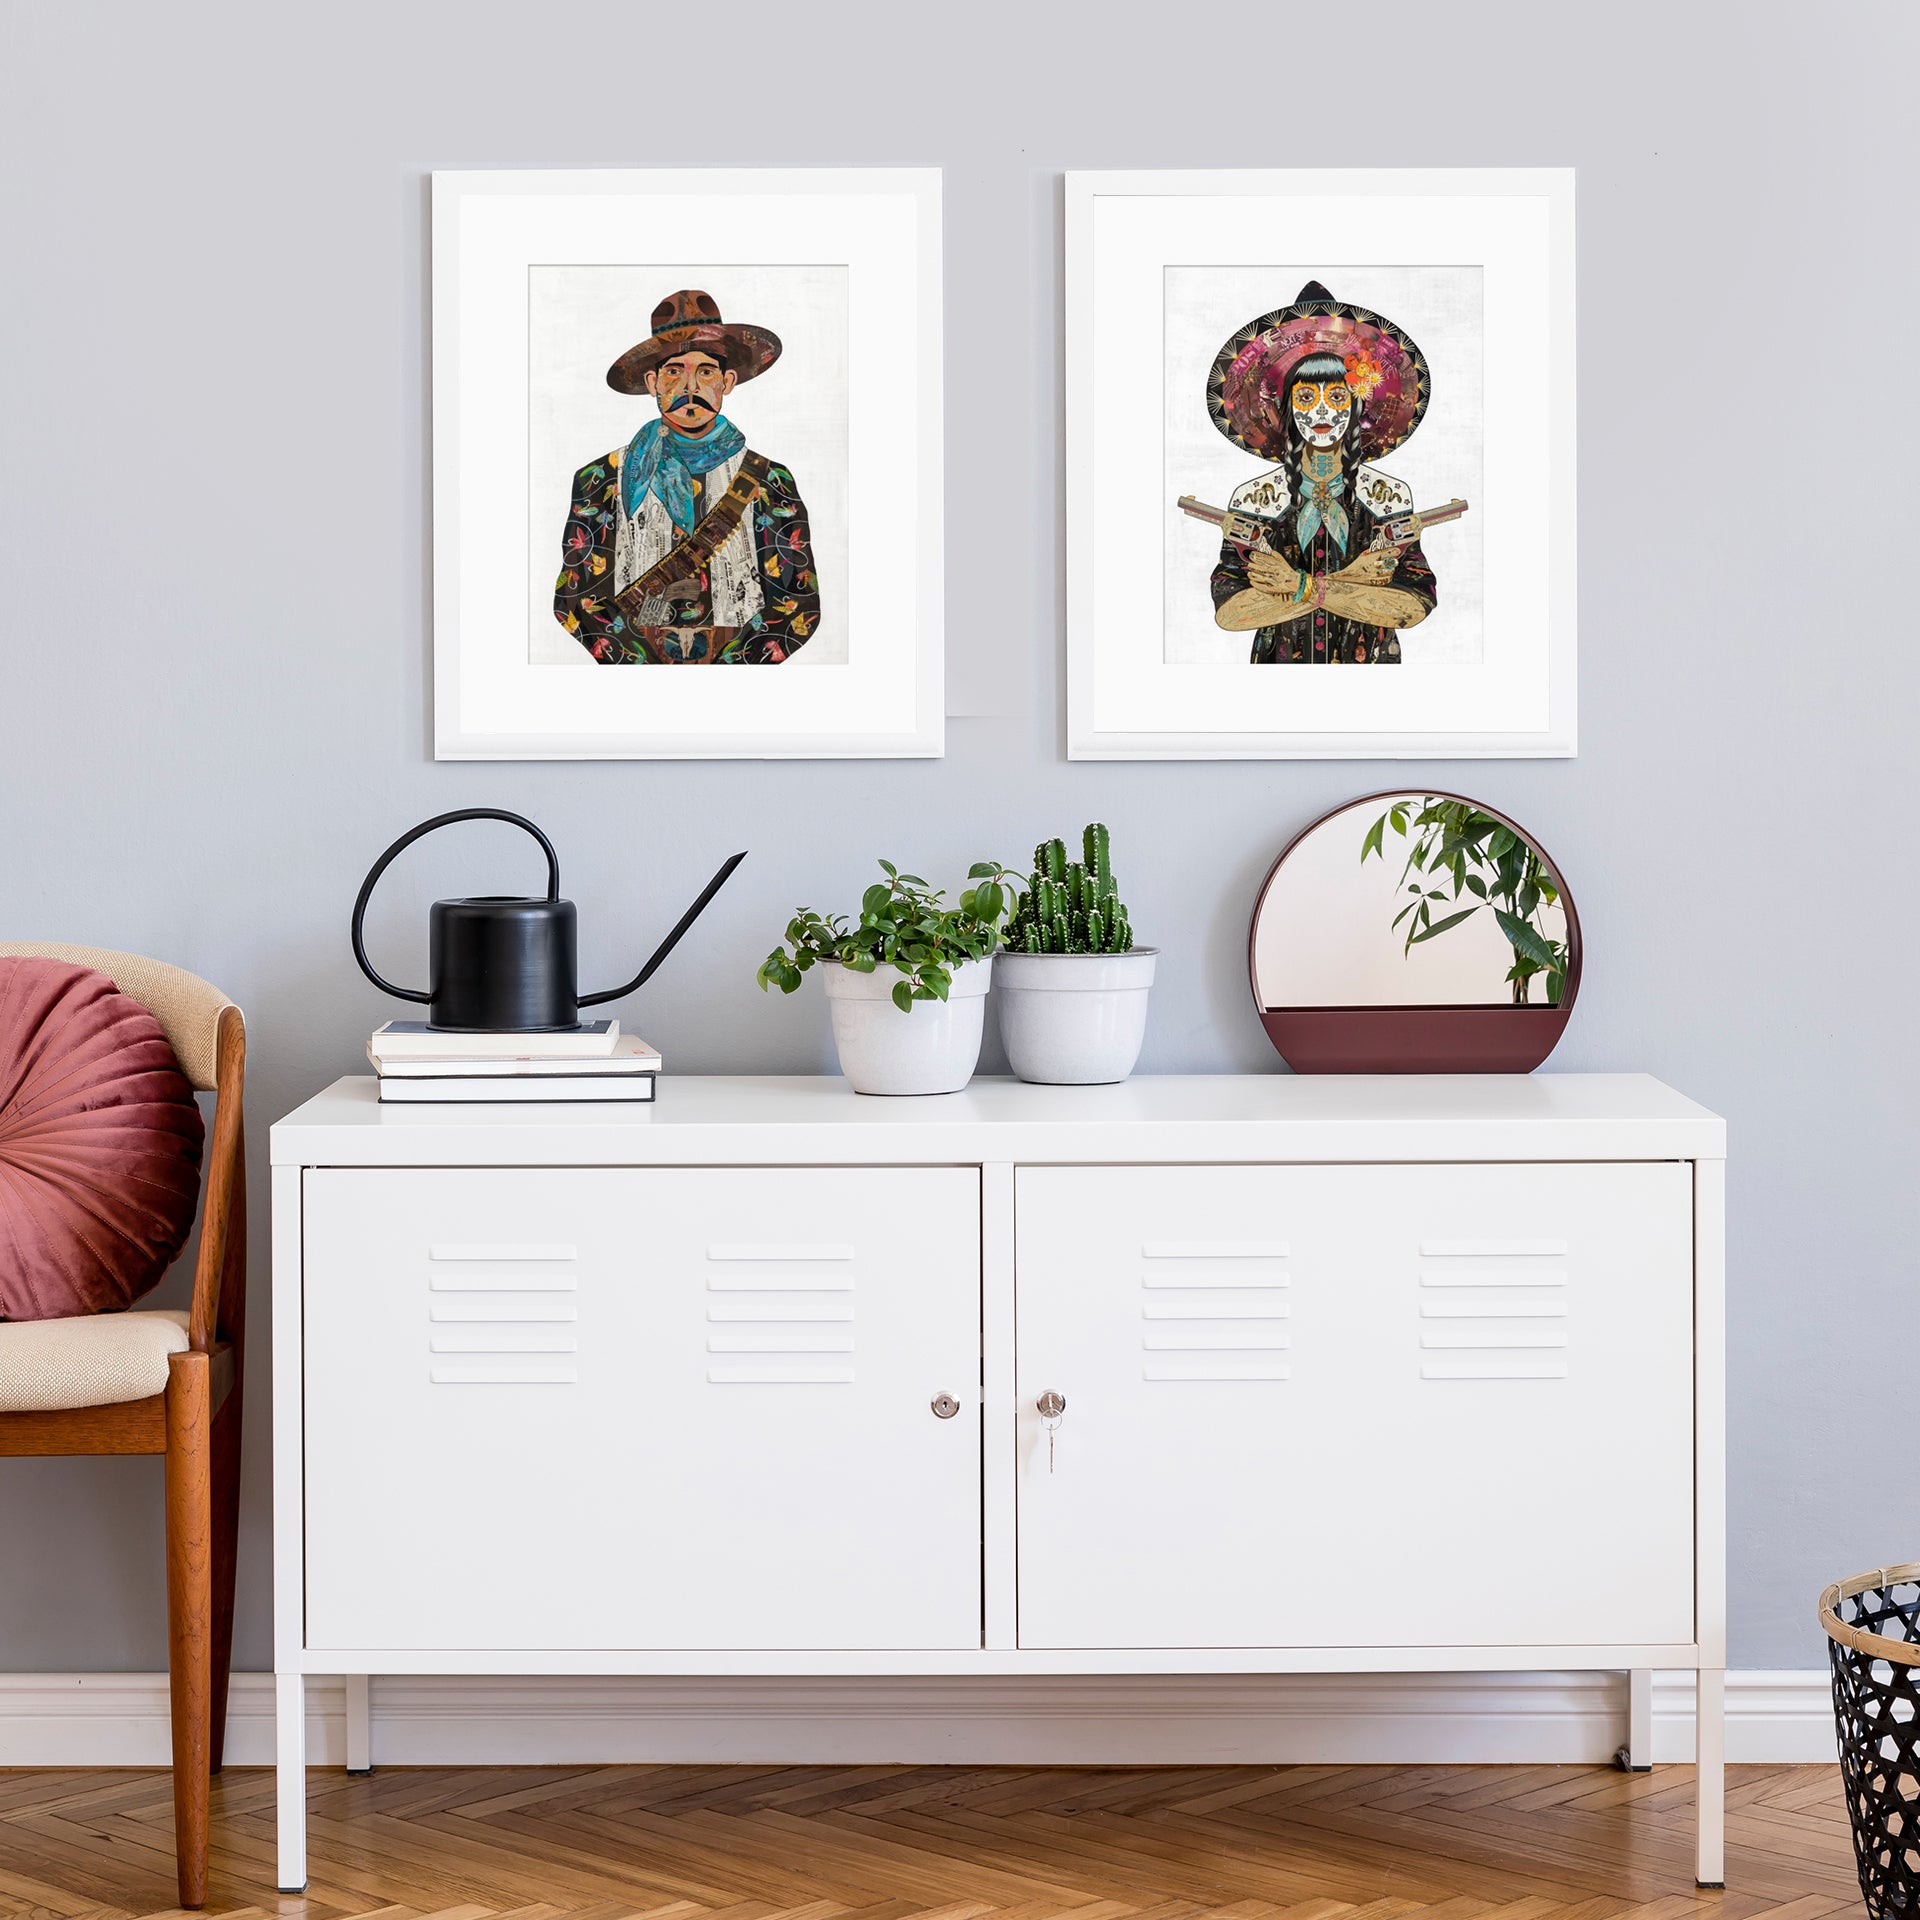 A charming set of cowboy and cowgirl art prints above a dresser showcasing the spirit of the Wild West with Southwest flair.